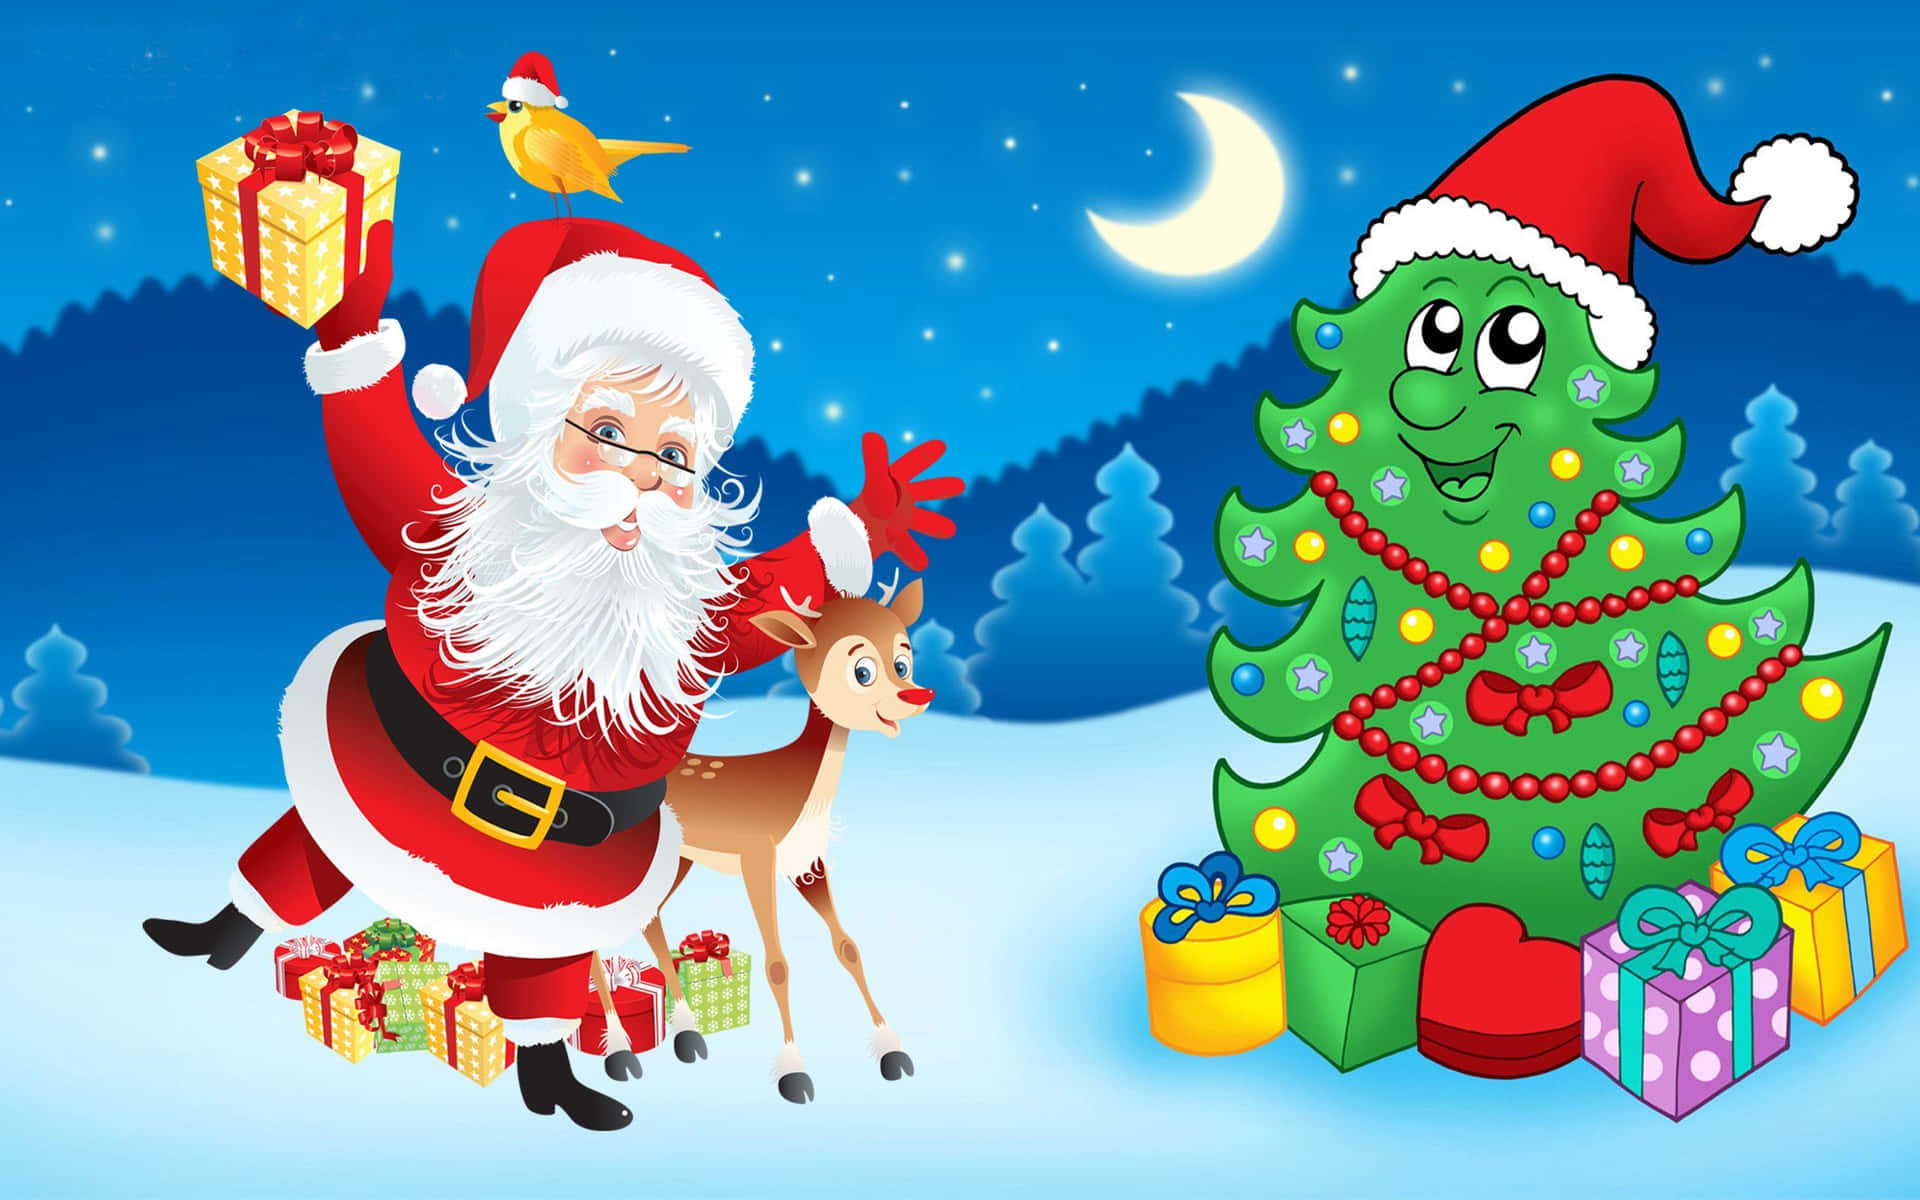 Download Christmas Cartoon Happy Santa Claus Holiday Tree Picture